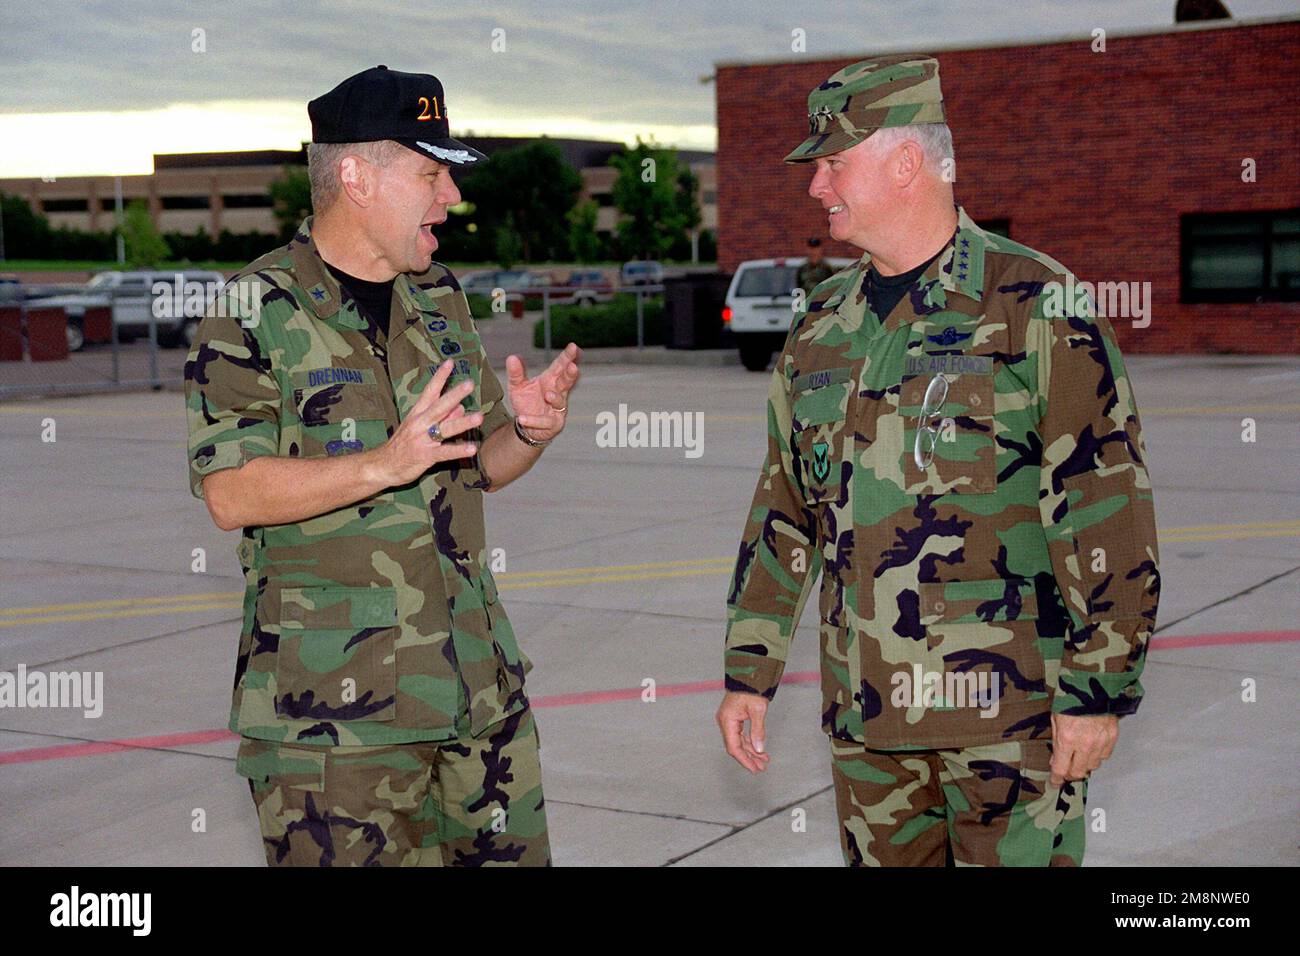 US Air Force Brigadier General Jerry M. Drennan (Left), Commander, 21st Space Wing, Peterson Air Force Base, Colorado, speaks with USAF CHIEF of STAFF, General Michael Ryan before his departure from Peterson AFB, CO, on September 2nd, 1999. Base: Peterson Air Force Base State: Colorado (CO) Country: United States Of America (USA) Stock Photo